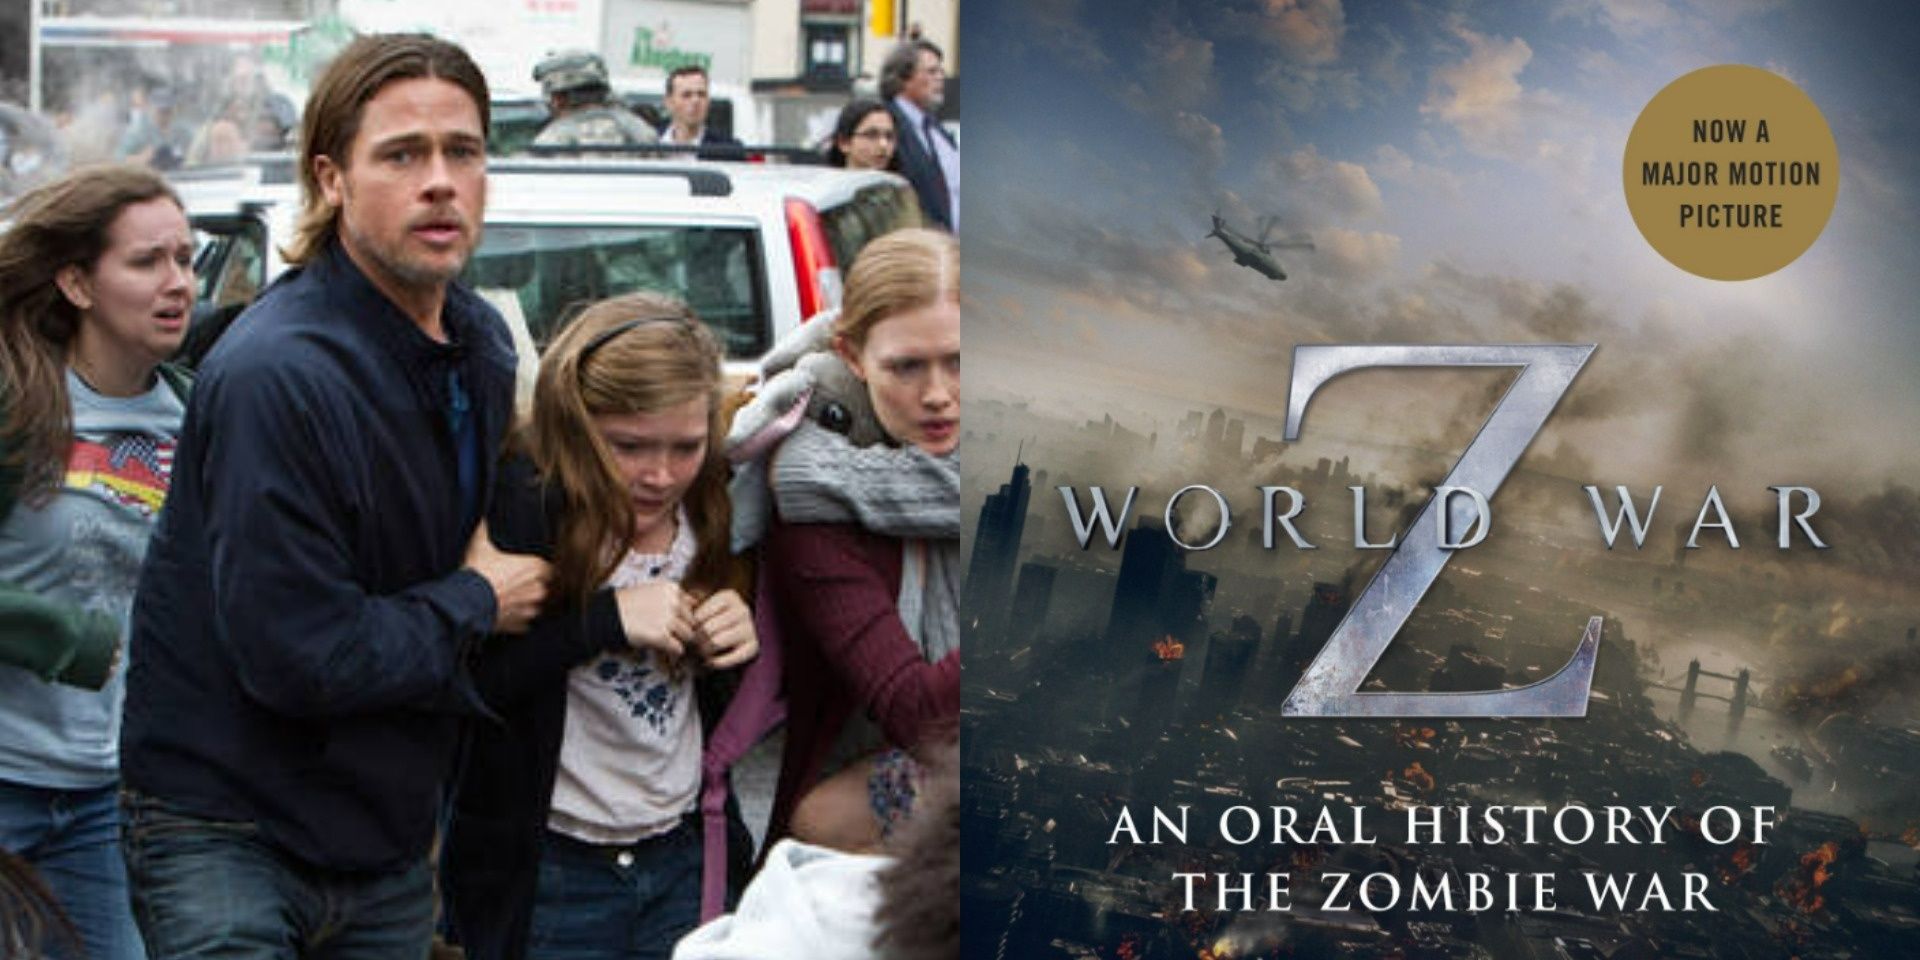 (Left) Gerry protectively holding his family / (Right) World War Z: An Oral History of the Zombie War book cover